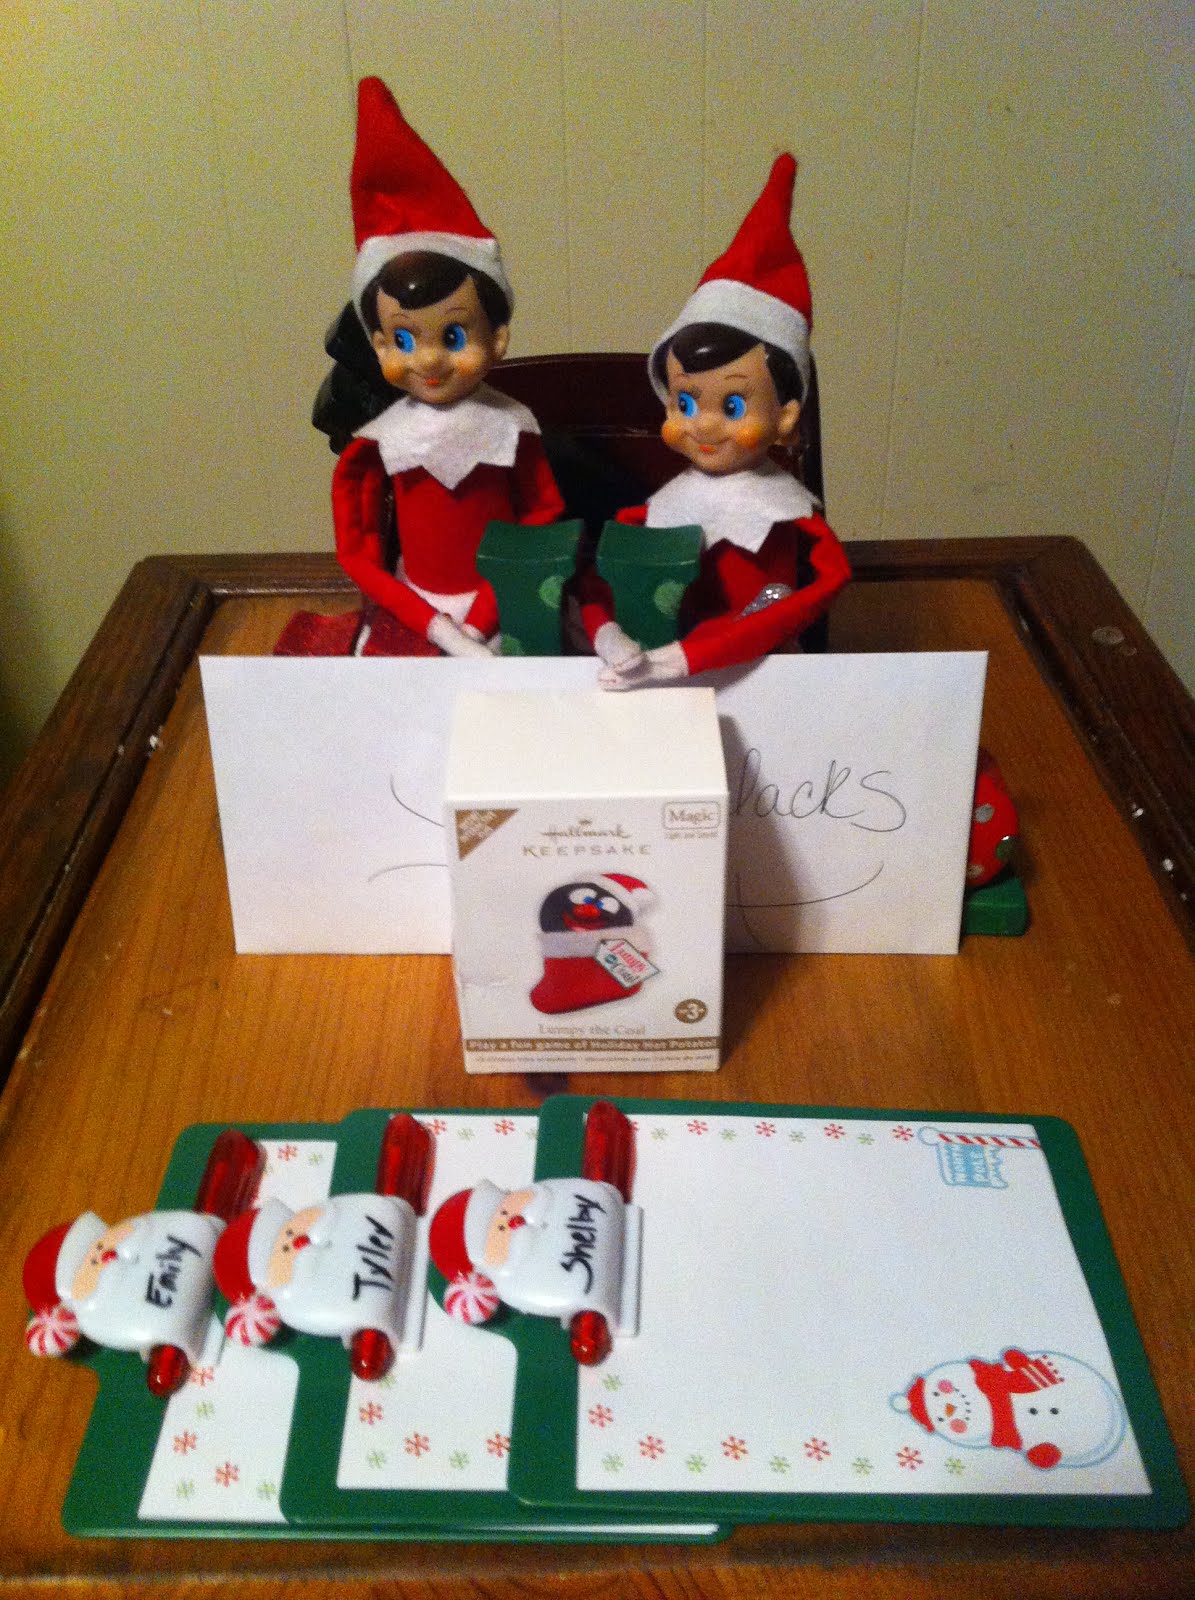 CrAzY Working Mom: It's that time of year again! The Elves Are Back.